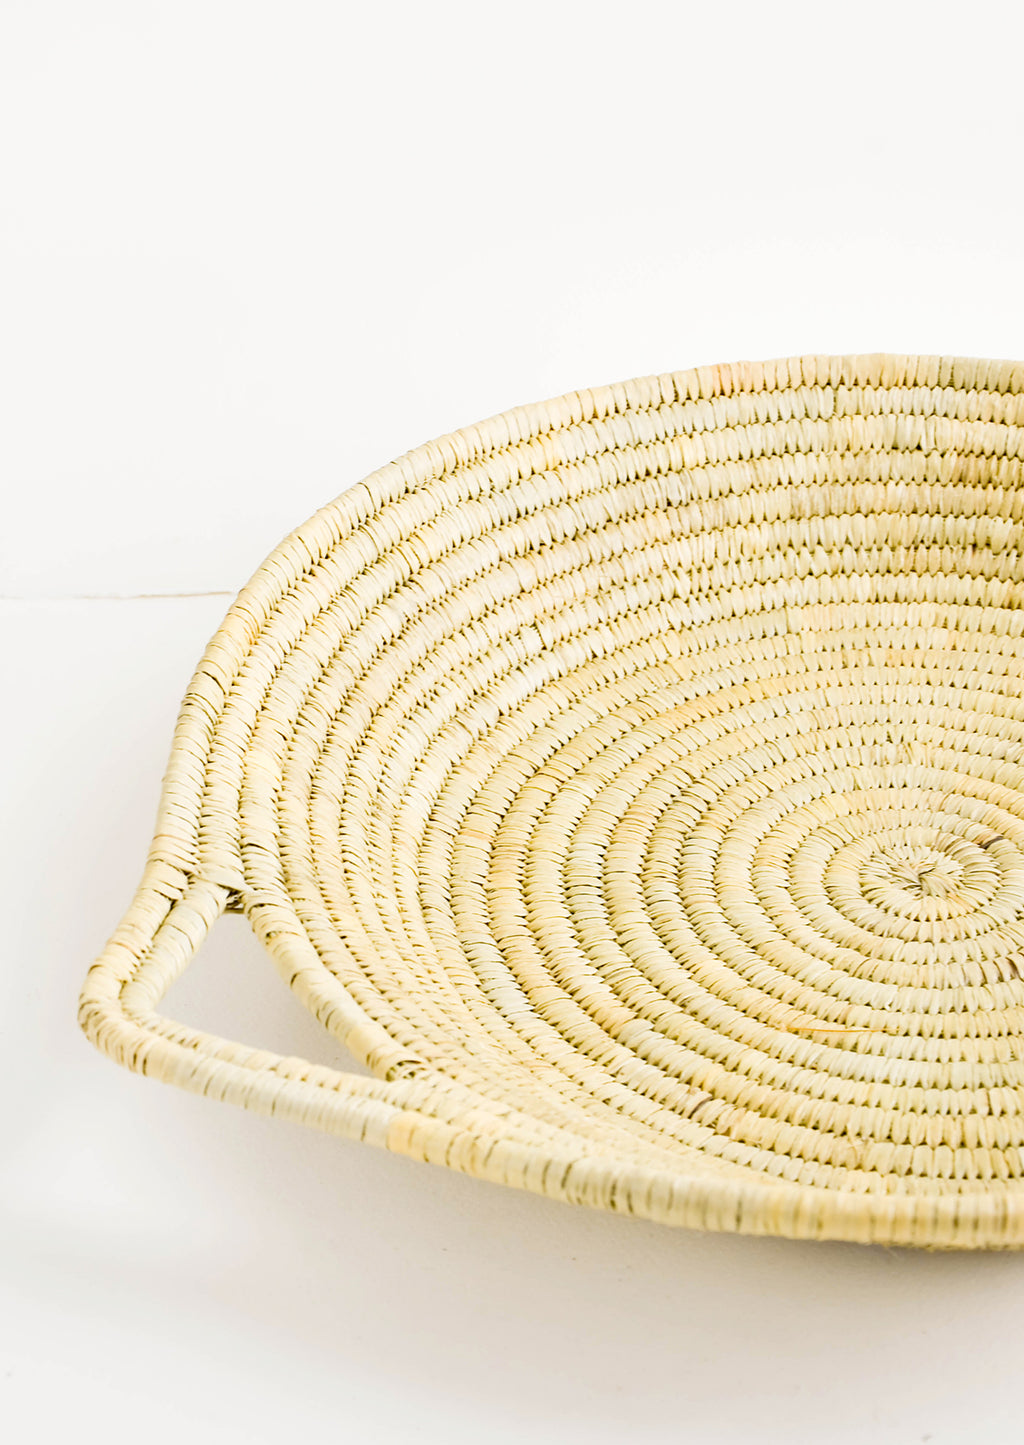 2: Flat, round platter woven from natural straw with handles at sides